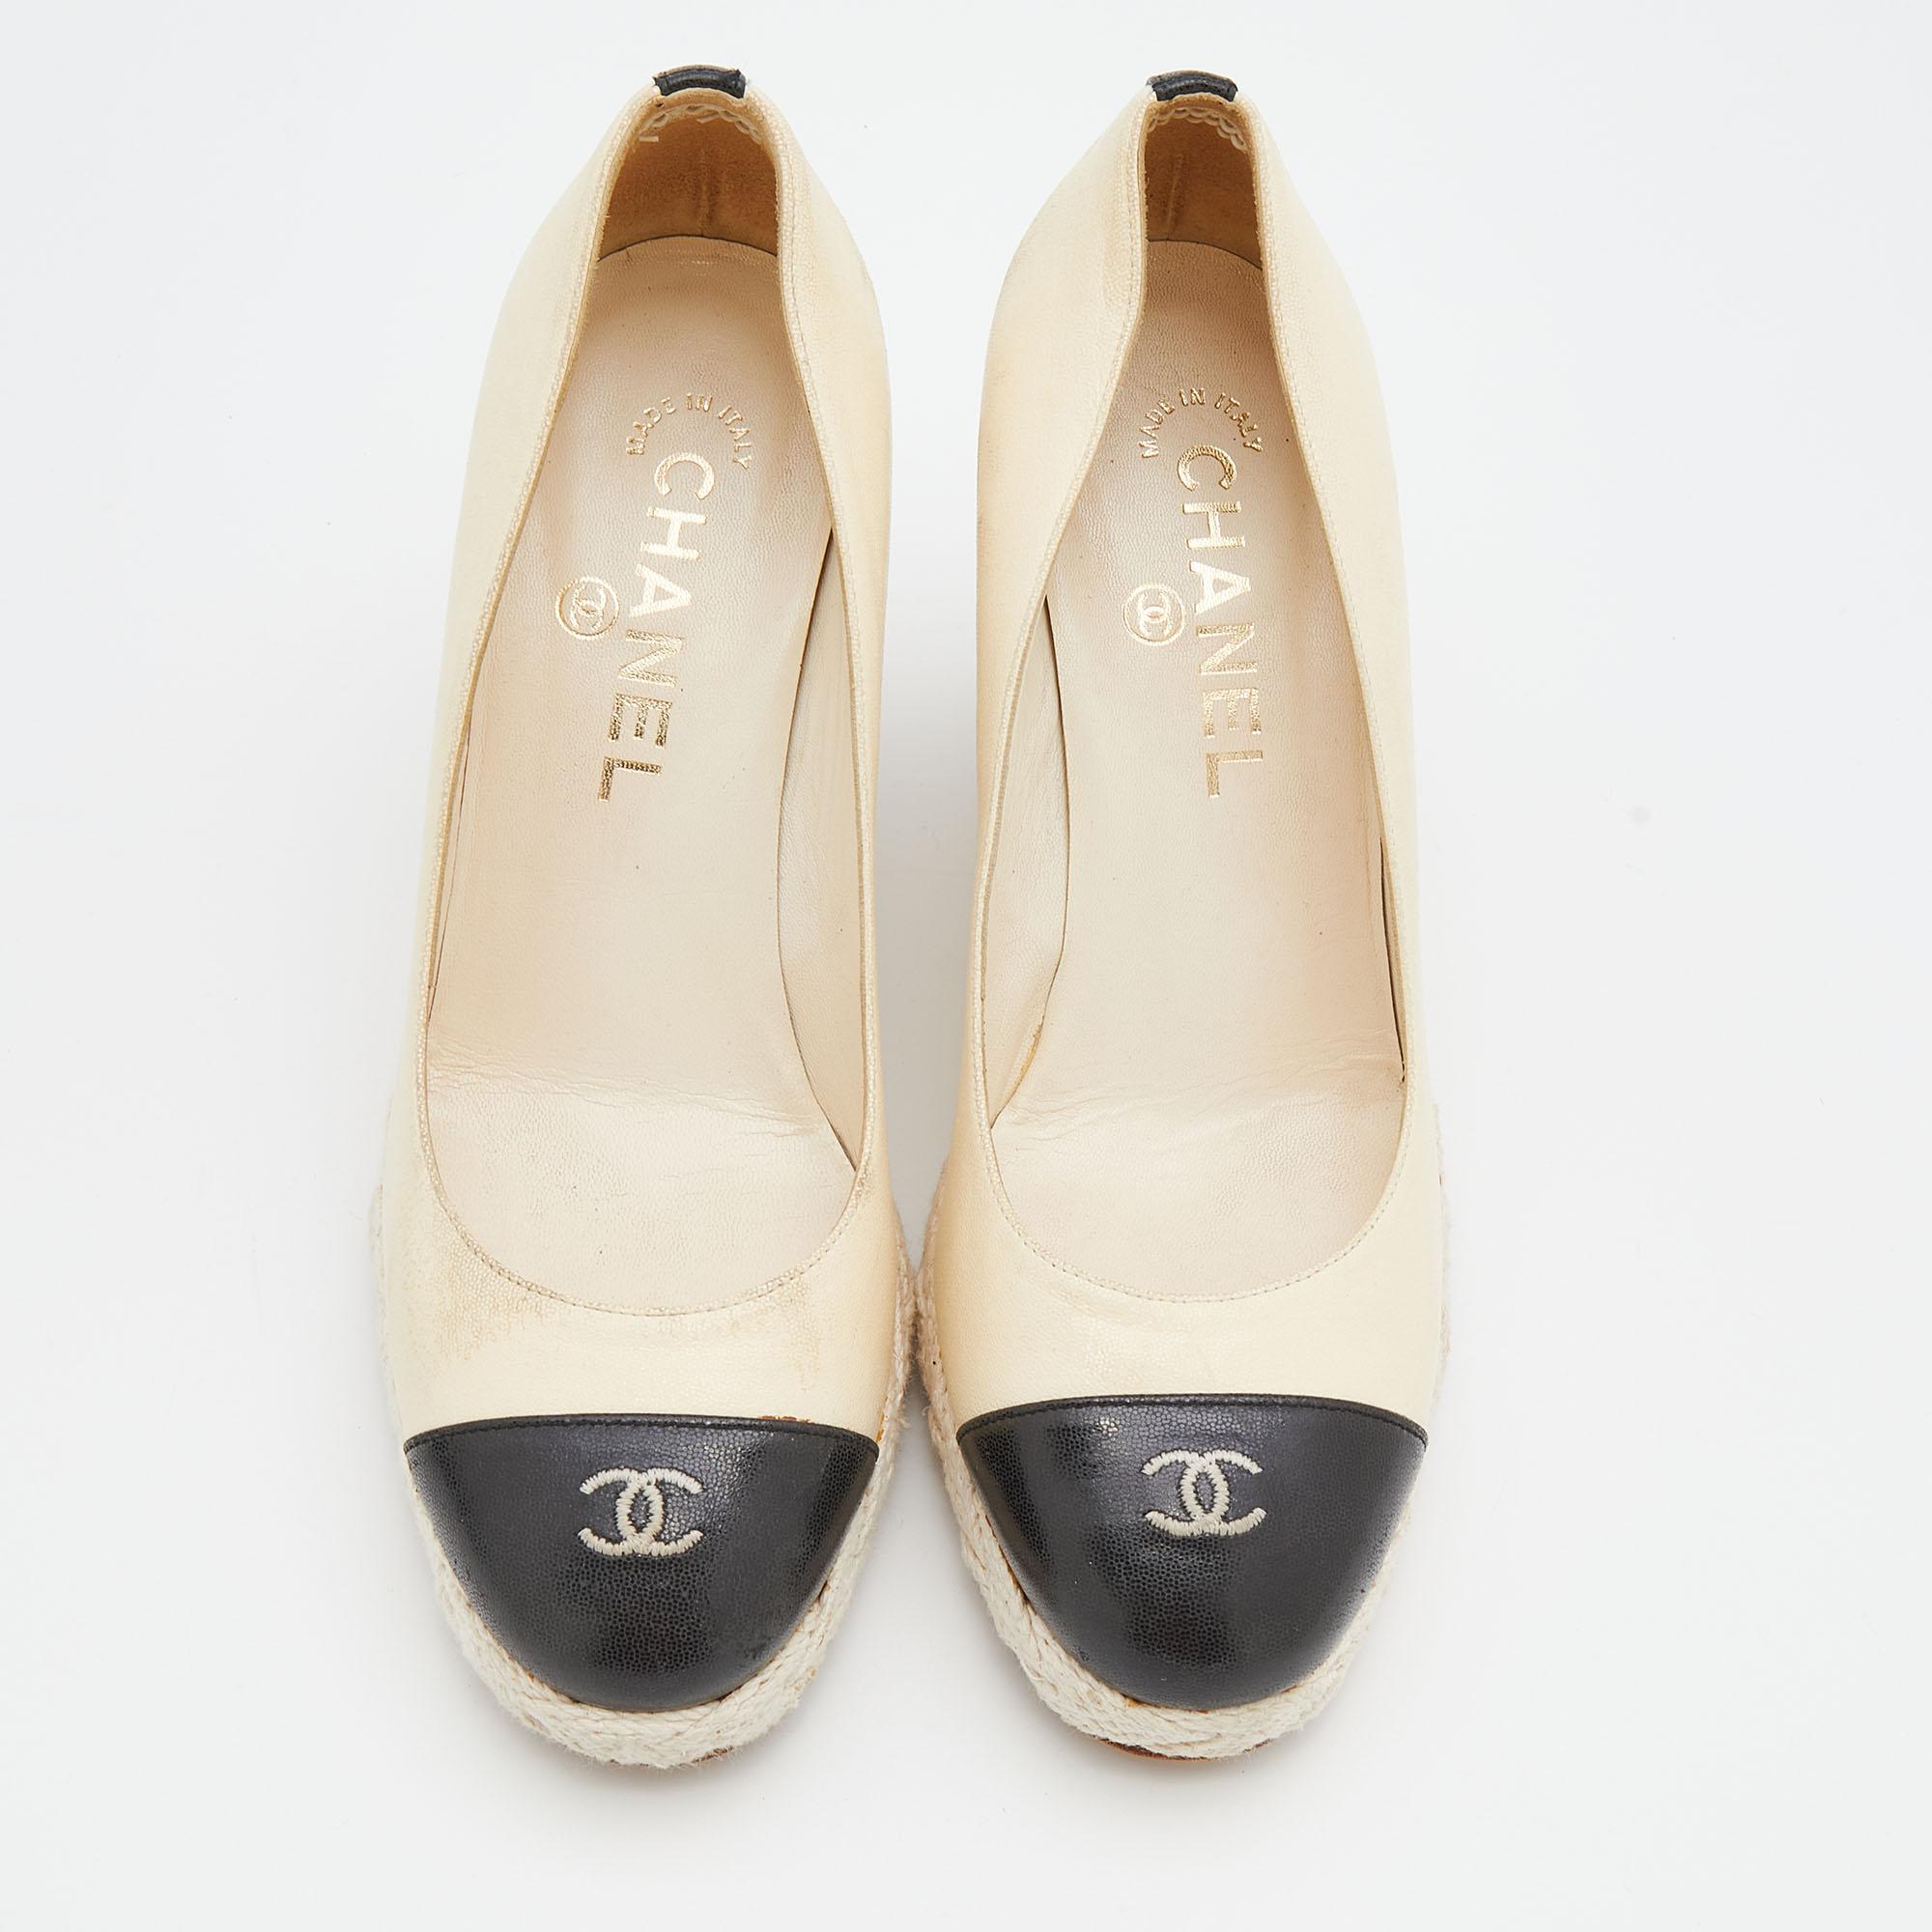 Chanel’s elegance and distinctive style are evident in this pair of pumps. Made from leather, it features espadrille trims, platforms and wedge heels. The 'CC' detailing on the cap toes offer these shoes a signature touch.

Includes: Original